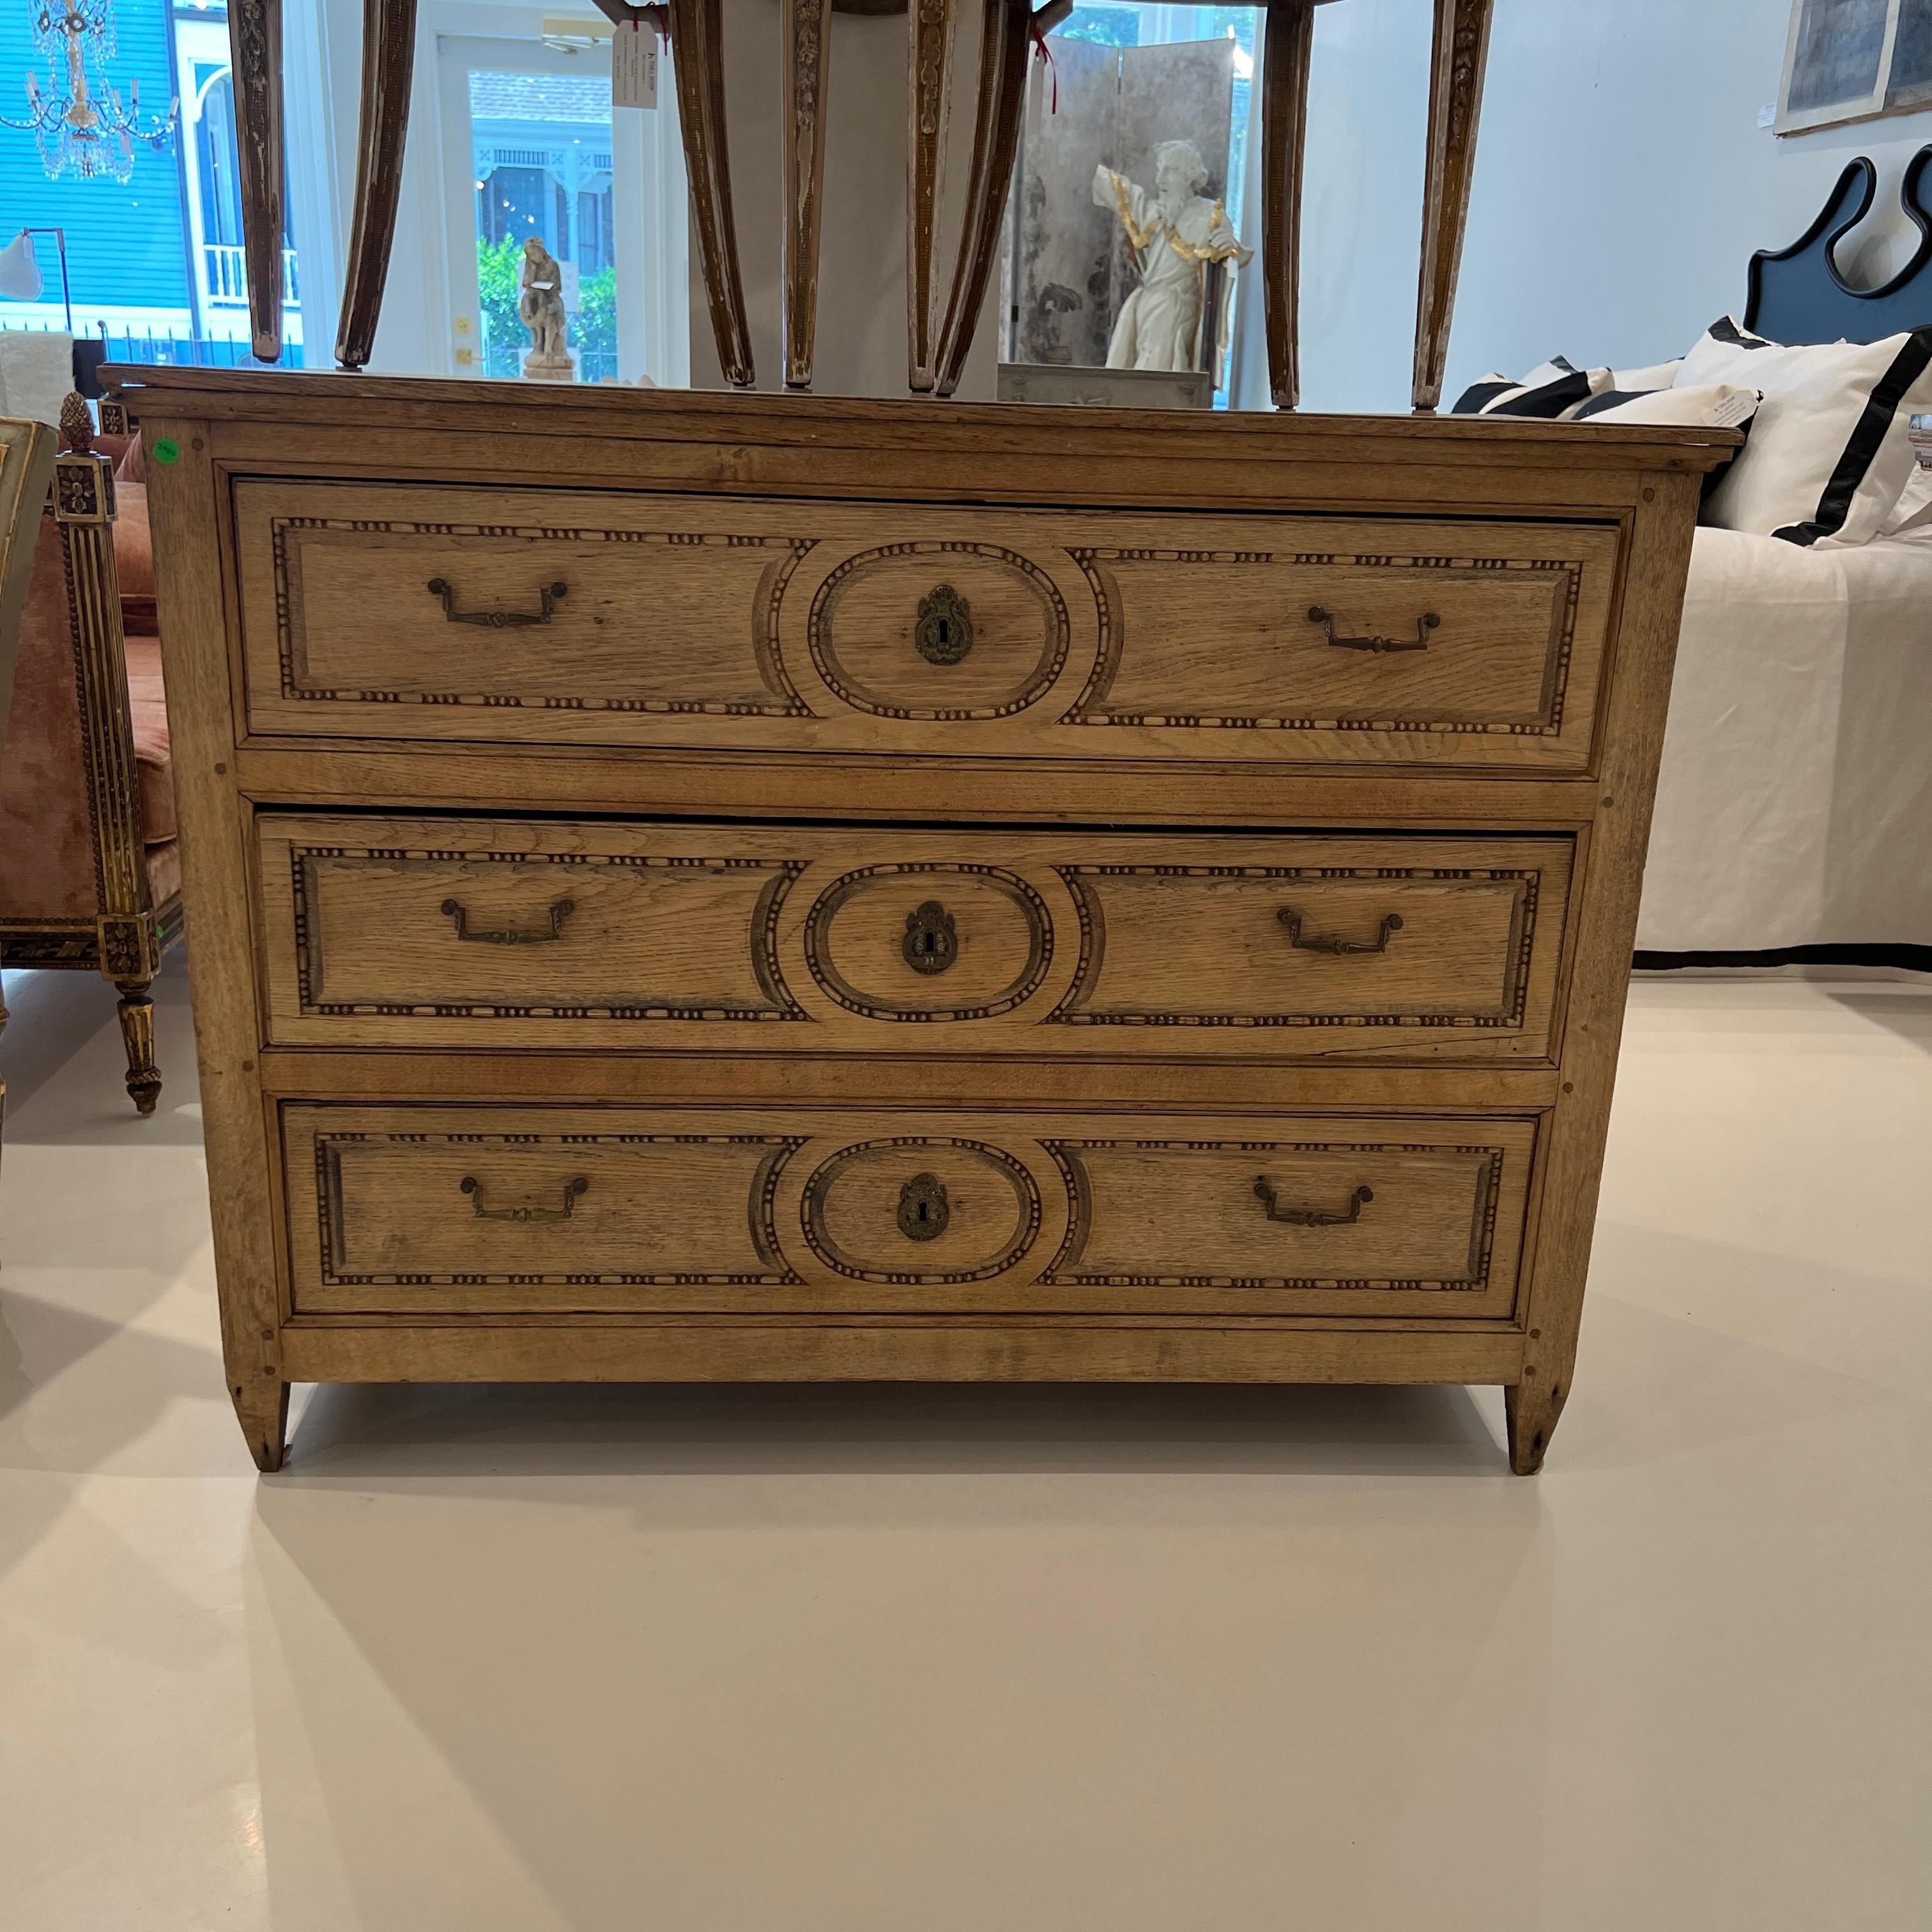 This fine chest is defined by softness and symmetry.  It has a pale oak finish and three ample drawers with fine detailed carving.  The sides are raised panels and the hardware is soft brass pulls in keeping with the overall mood, but then, bold